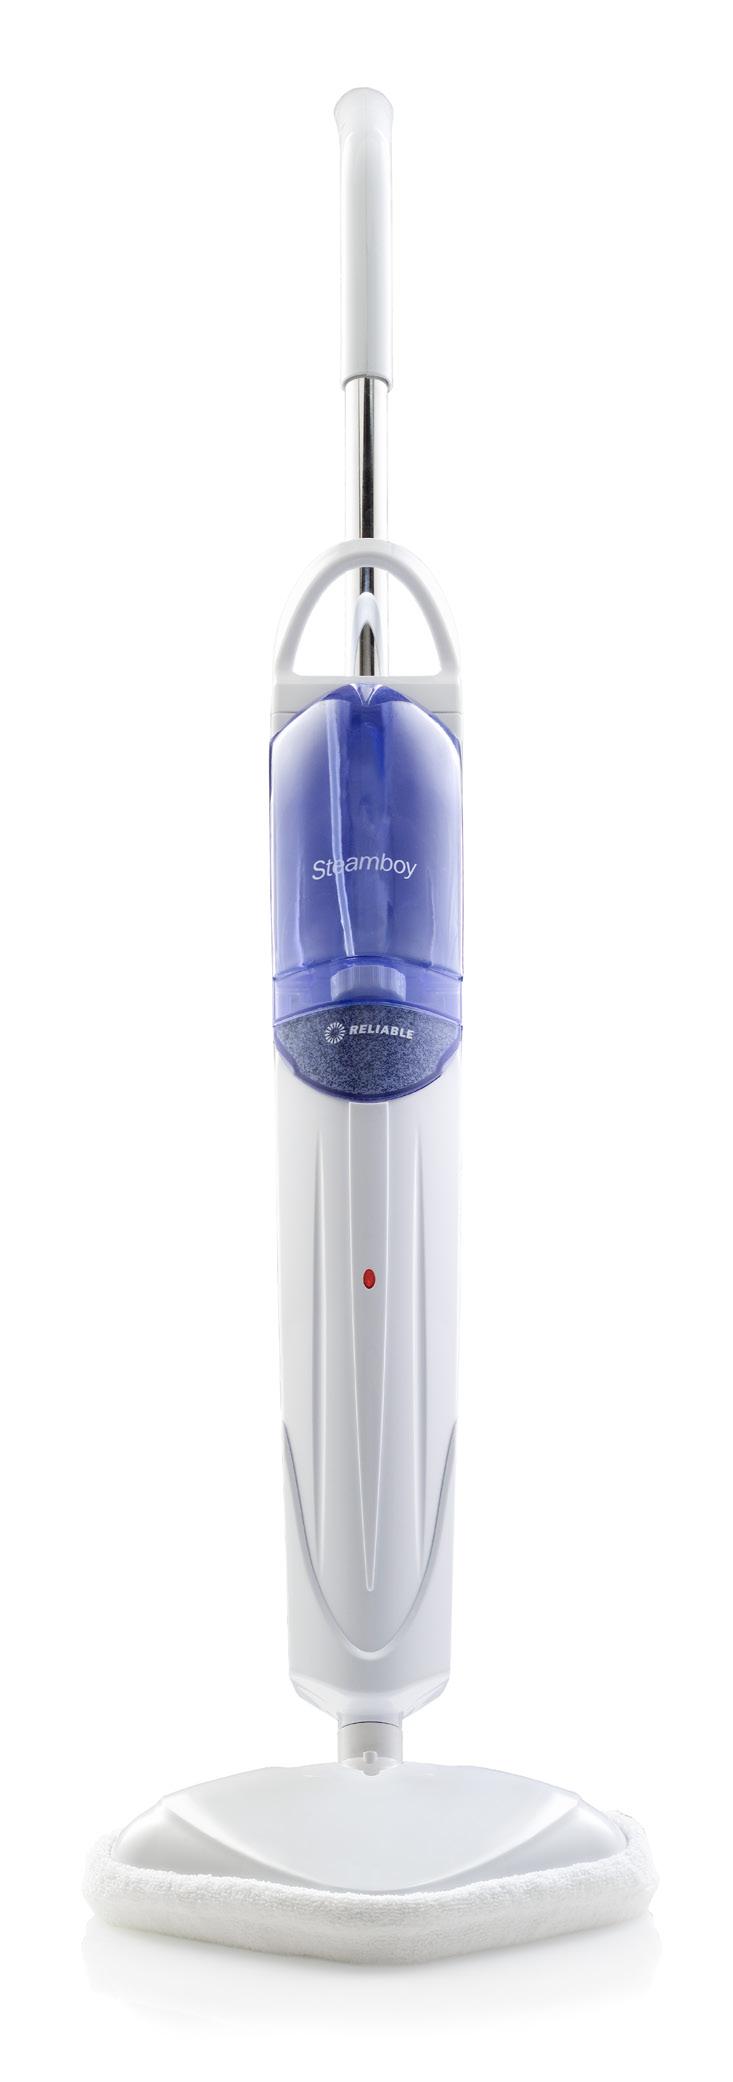 STEAMBOY T1 STEAM FLOOR MOP WITH CARPET GLIDE CLEAN YOUR FLOORS, PROTECT YOUR FAMILY Imagine cleaning your floors and carpets with the purity of simple H20 (water)!